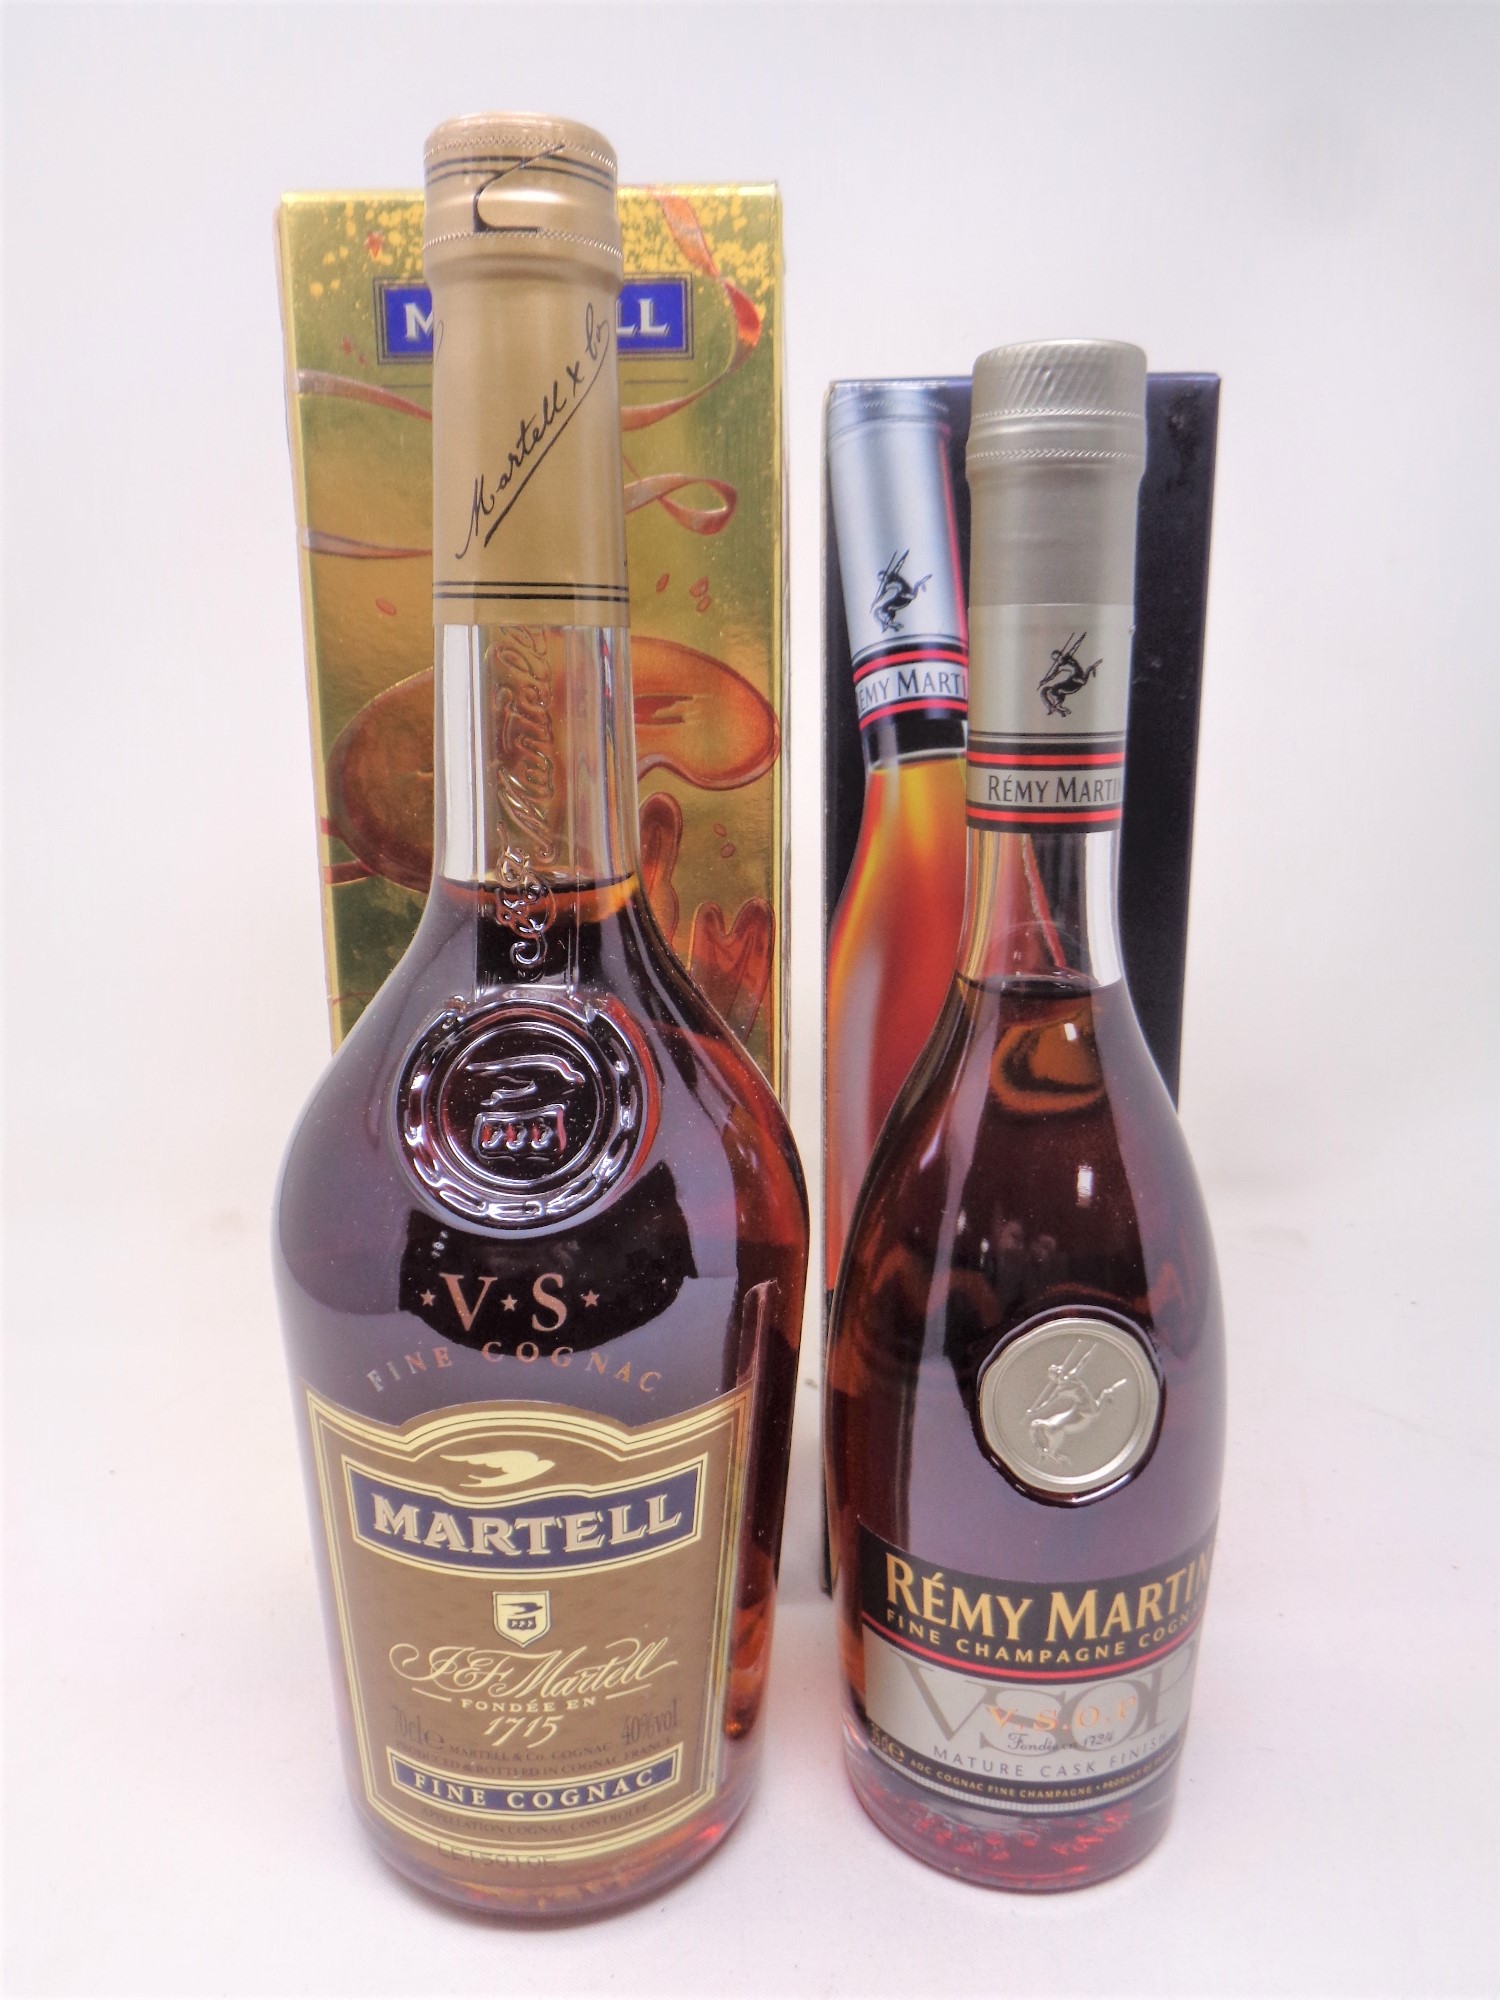 A boxed bottle of Remy Martin mature cask finish fine champagne cognac (35cl) together with a